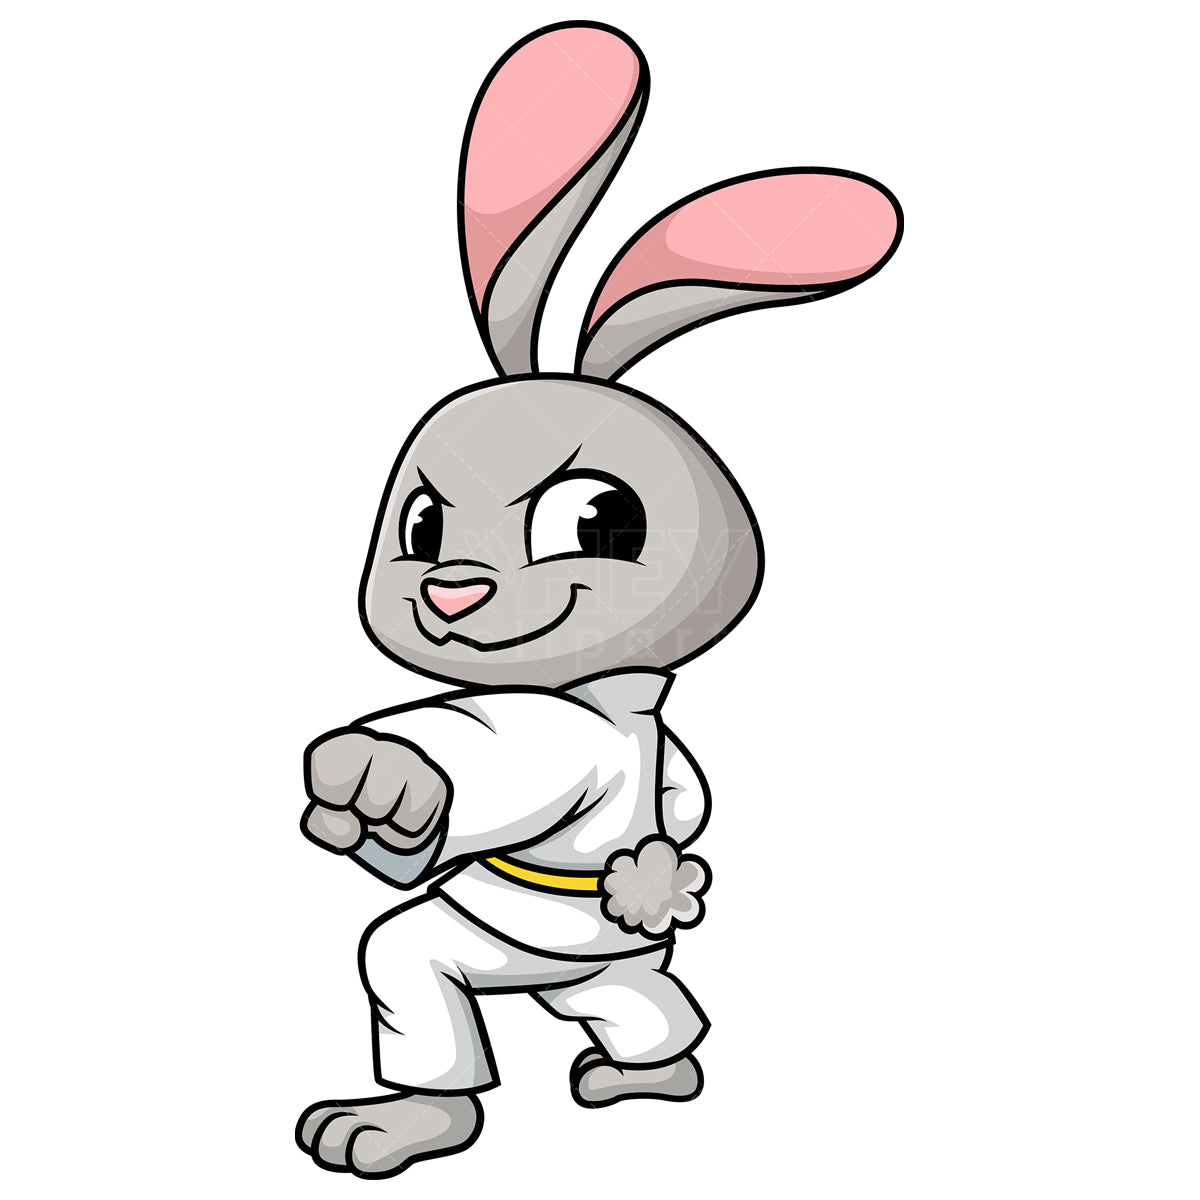 Royalty-free stock vector illustration of  a bunny doing karate.